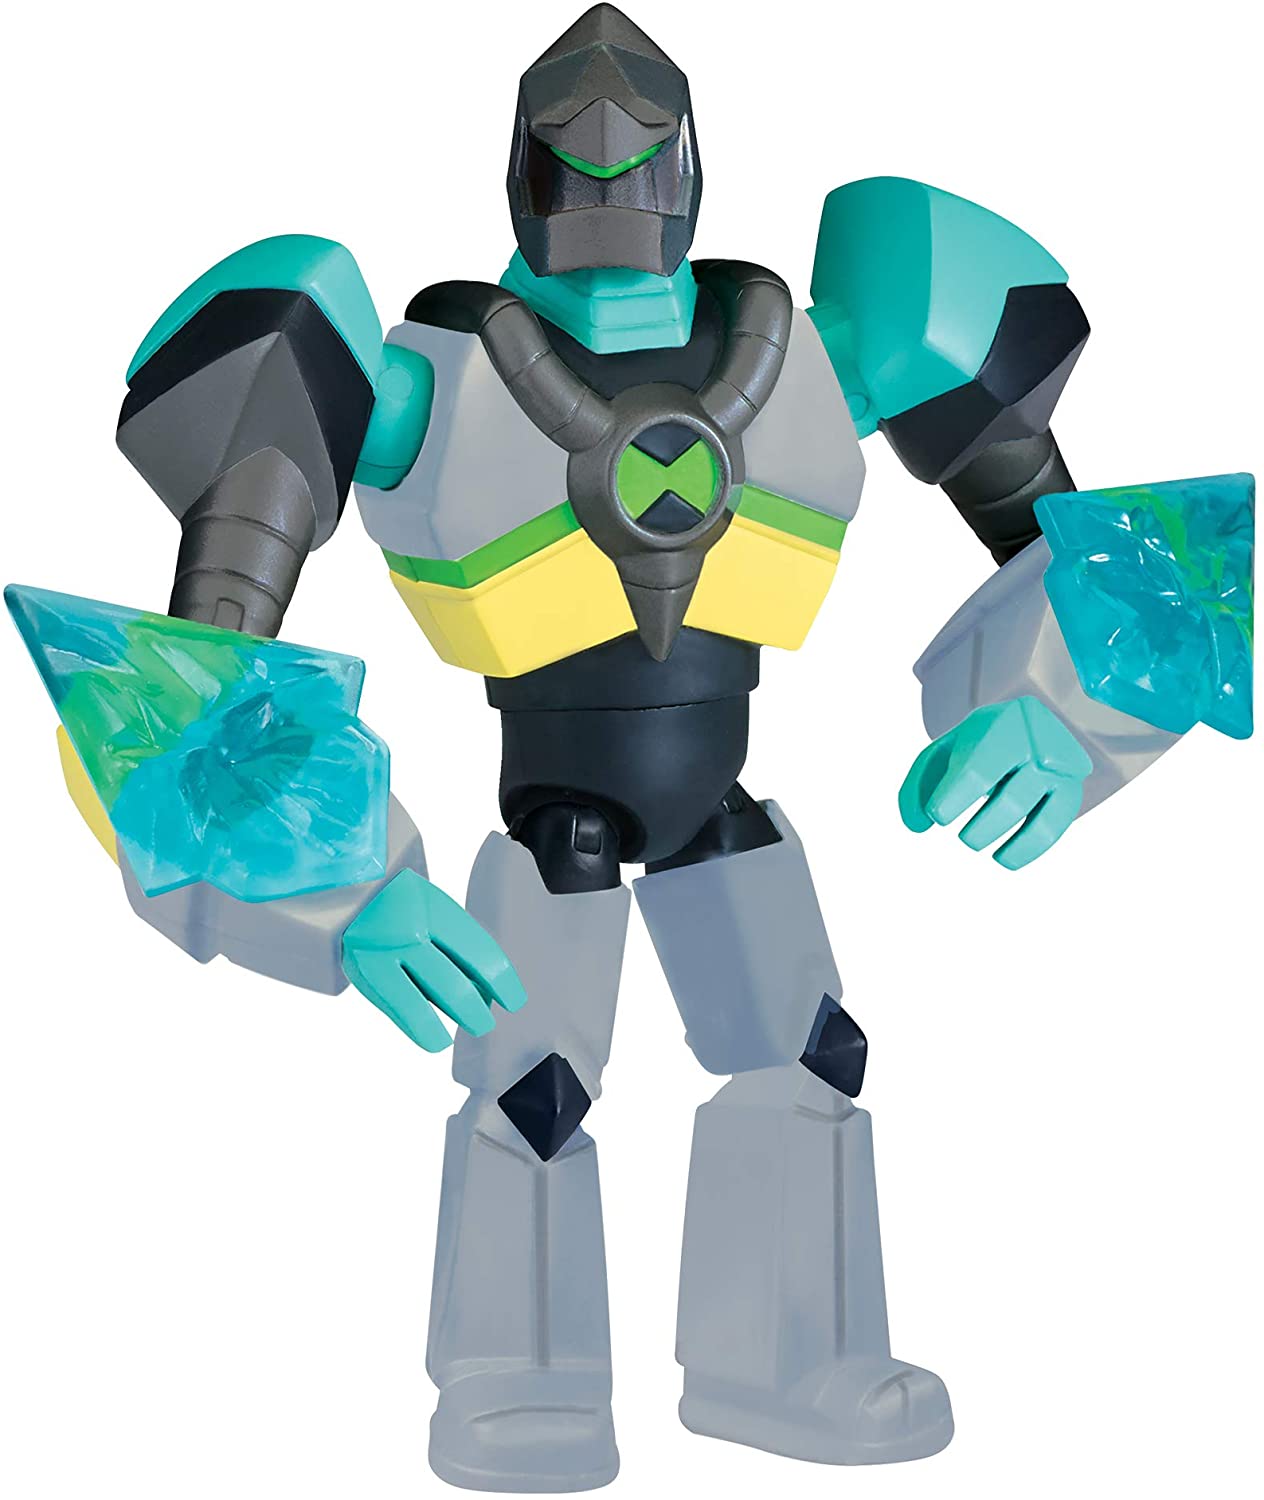 Ben Armored Diamondhead Figure You Think Is A